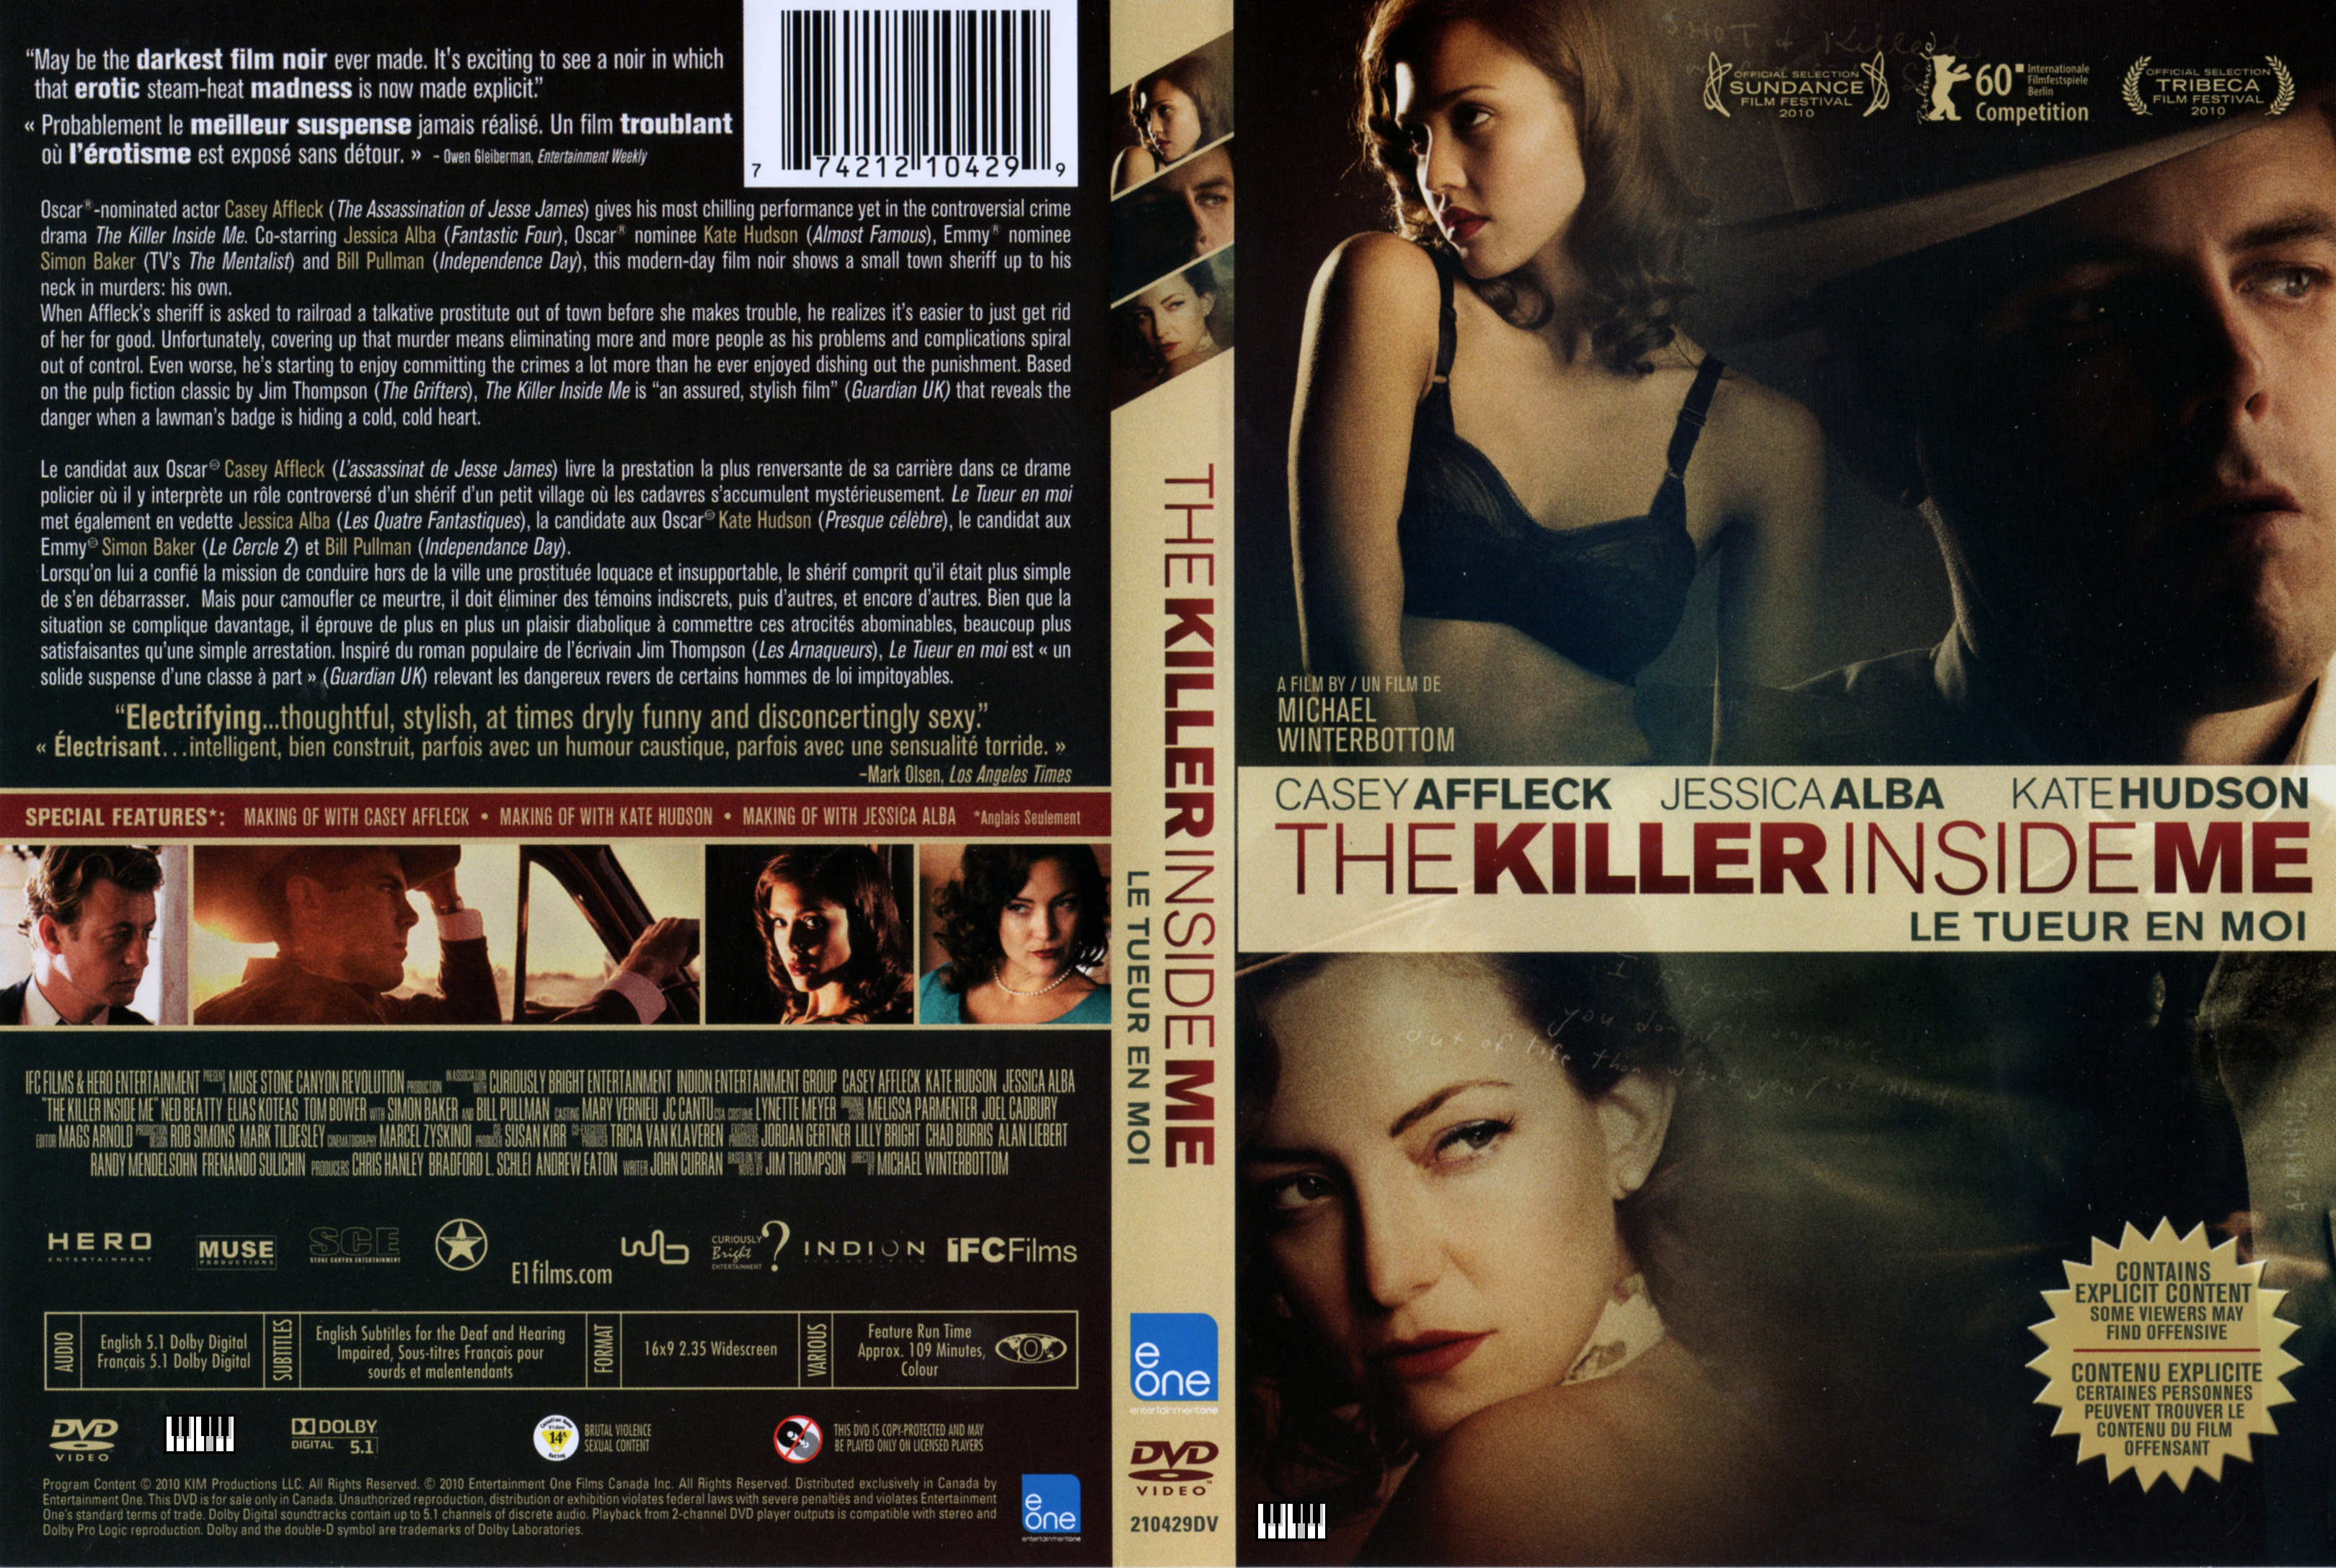 Jaquette DVD The killer inside me (Canadienne)